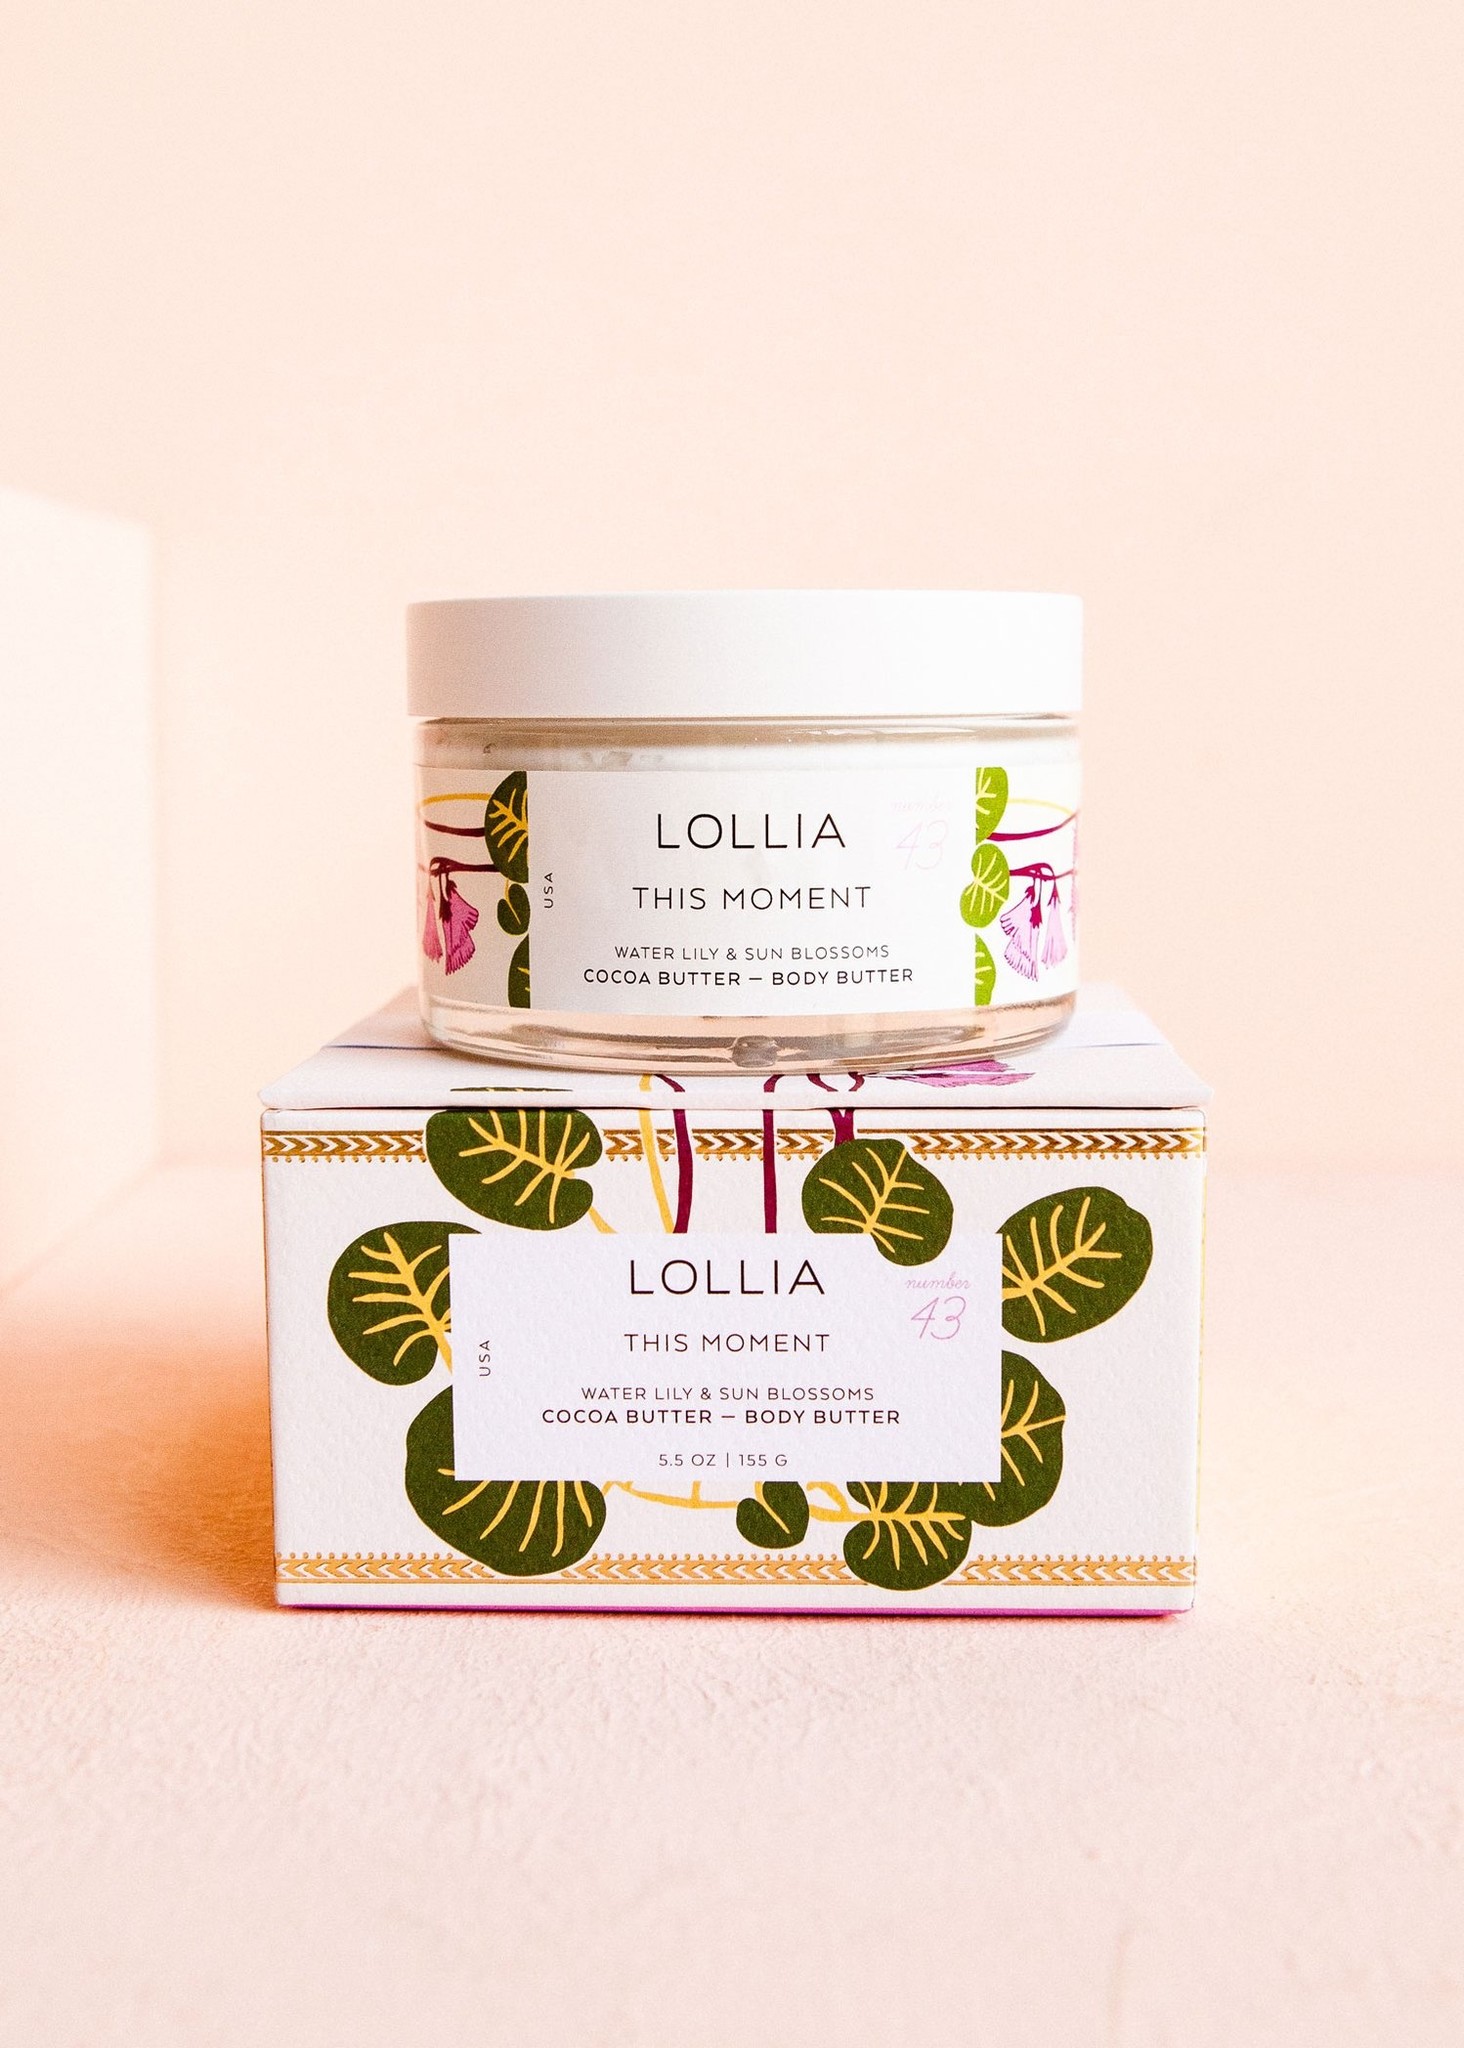 Lollia This Moment Whipped Body Butter